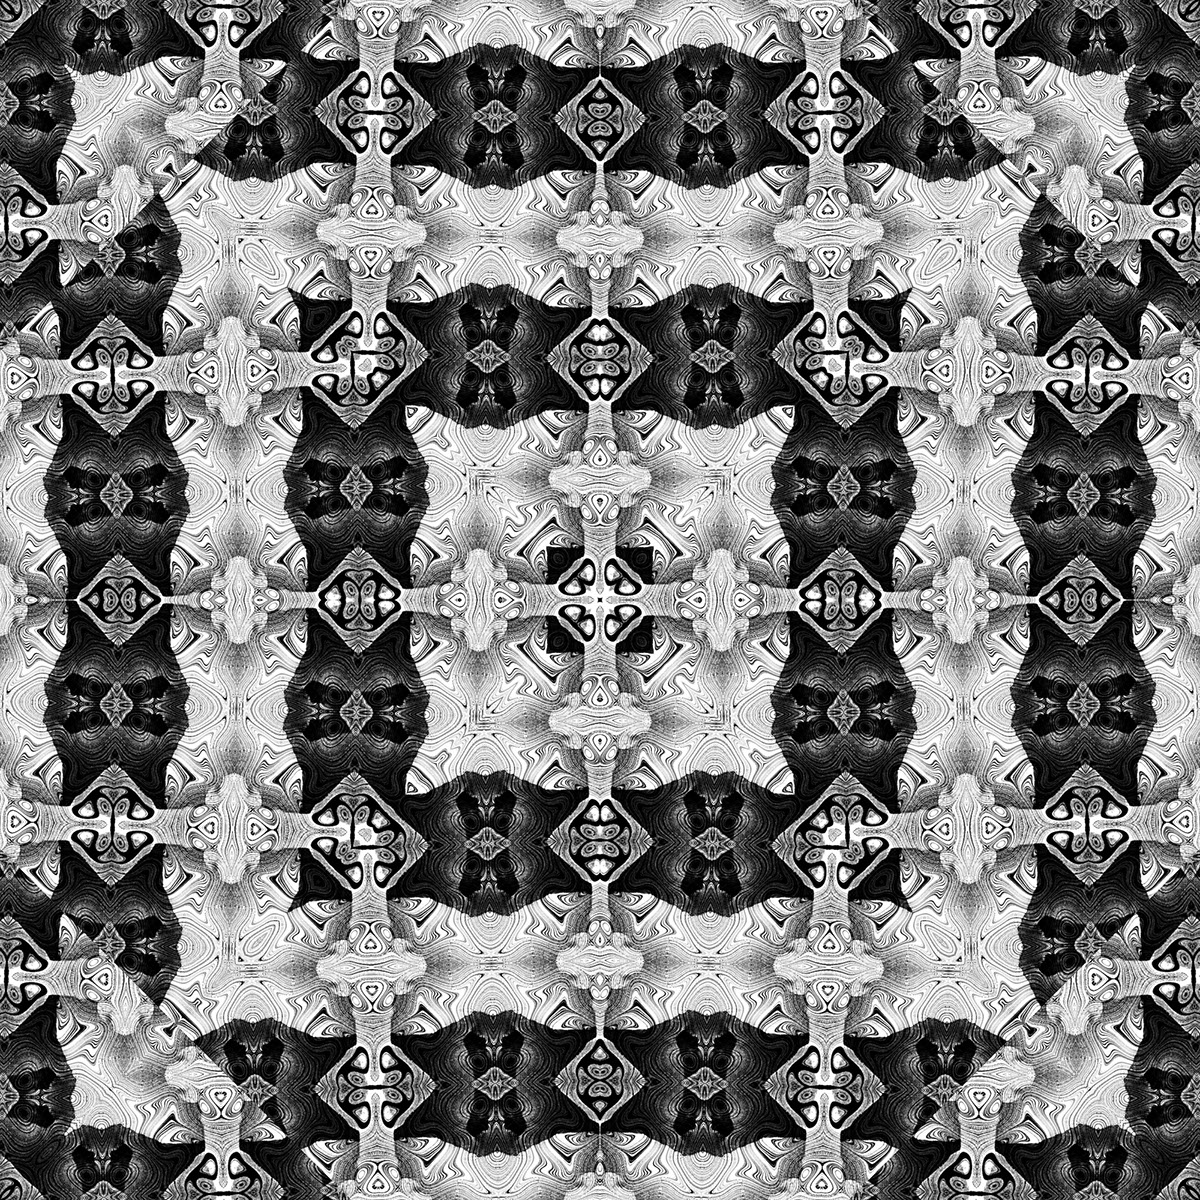 Dark Camellia Classic - 5 Seamless Patterns Pack rendition image